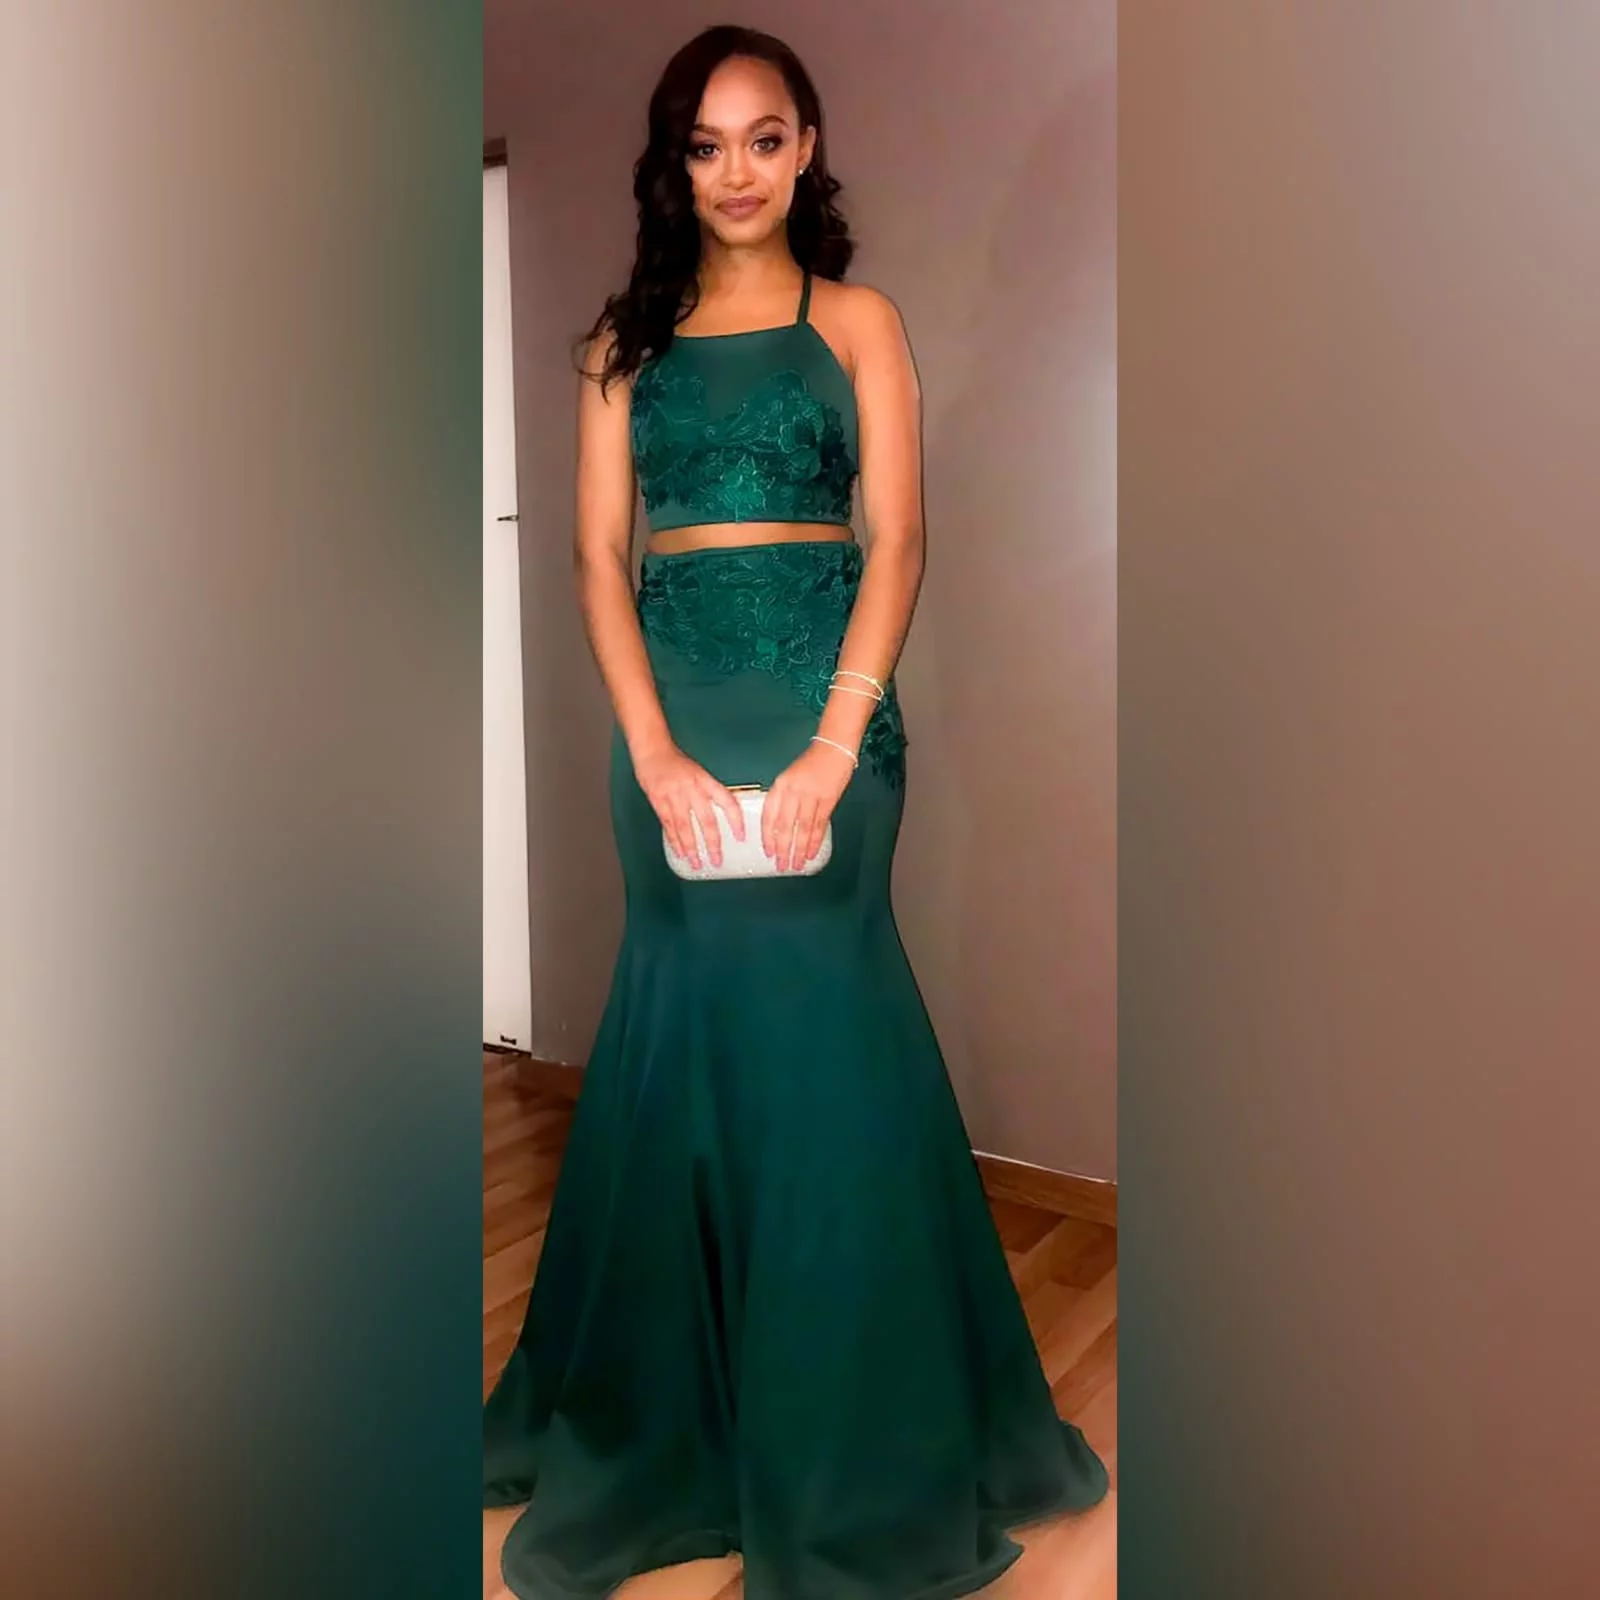 2 piece emerald green mermaid prom dress 9 2 piece emerald green mermaid prom dress. A gorgeous crop top with a lace-up open back, with a mermaid skirt. Lace detail on skirt and top for a classic touch.